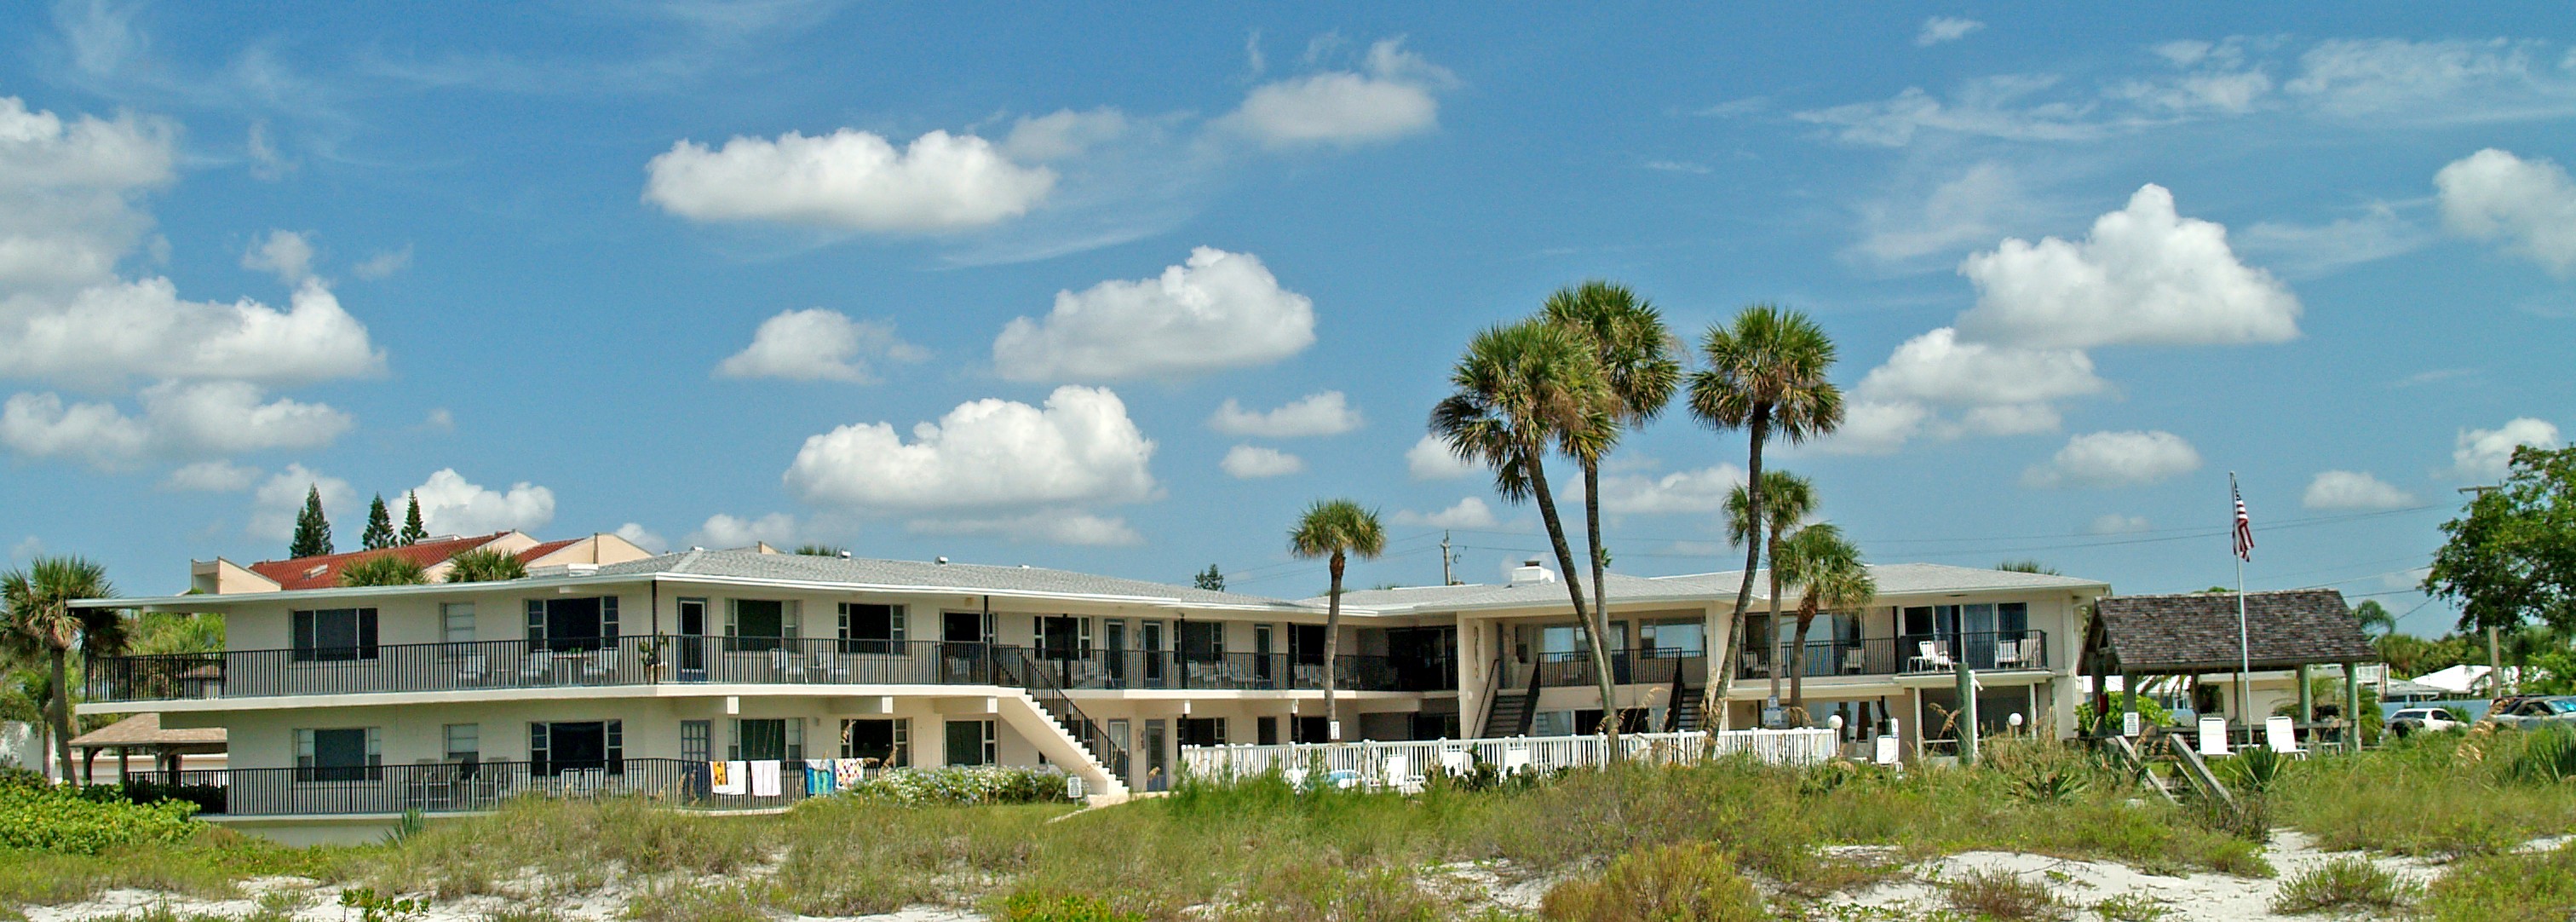 Beachcomber In Venice Fl viewed from the Private Gulf of Mexico Beachfront